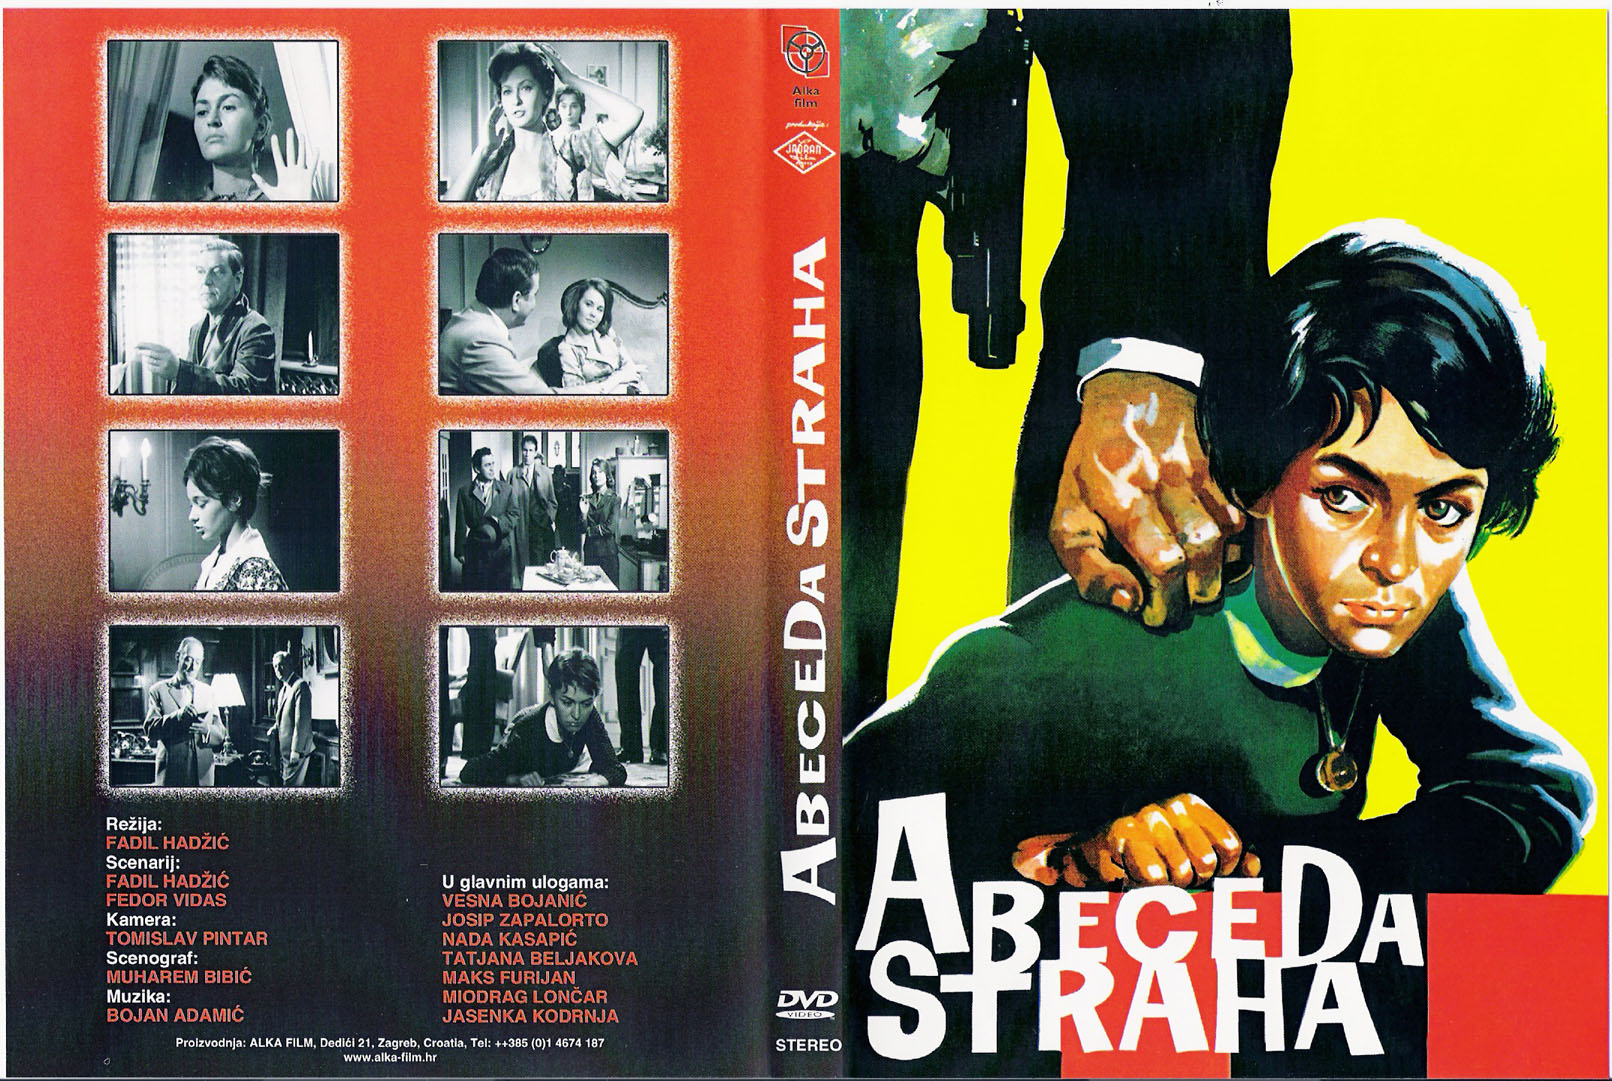 Click to view full size image -  DVD Cover - A - abeceda_straha_dvd - abeceda_straha_dvd.jpg